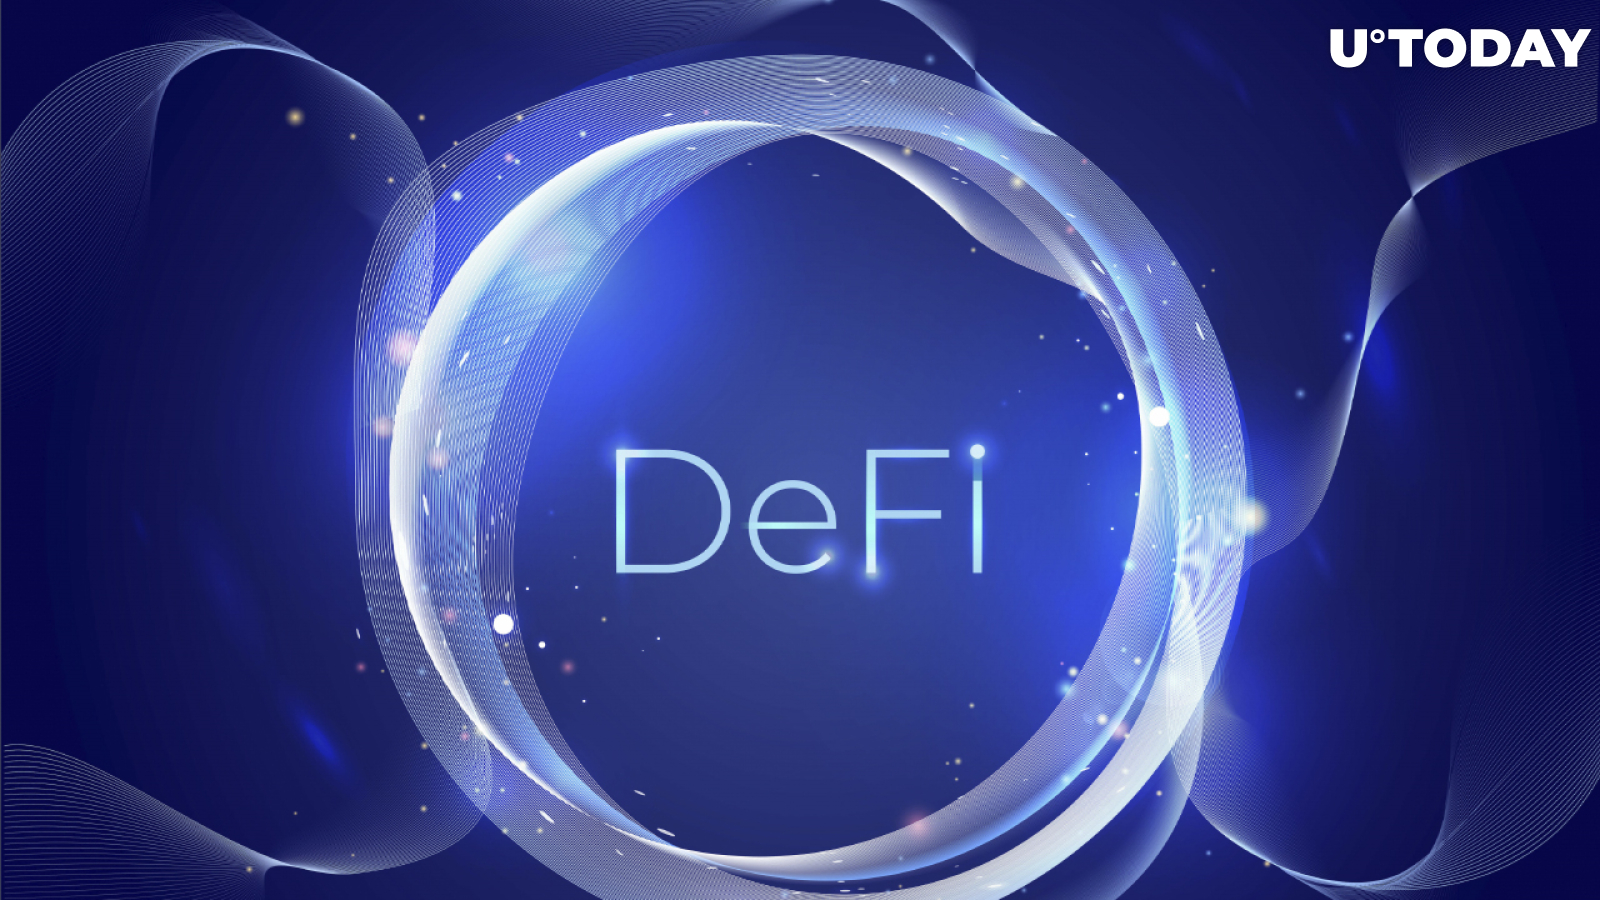 DeFi Development Tools to Pay Attention To